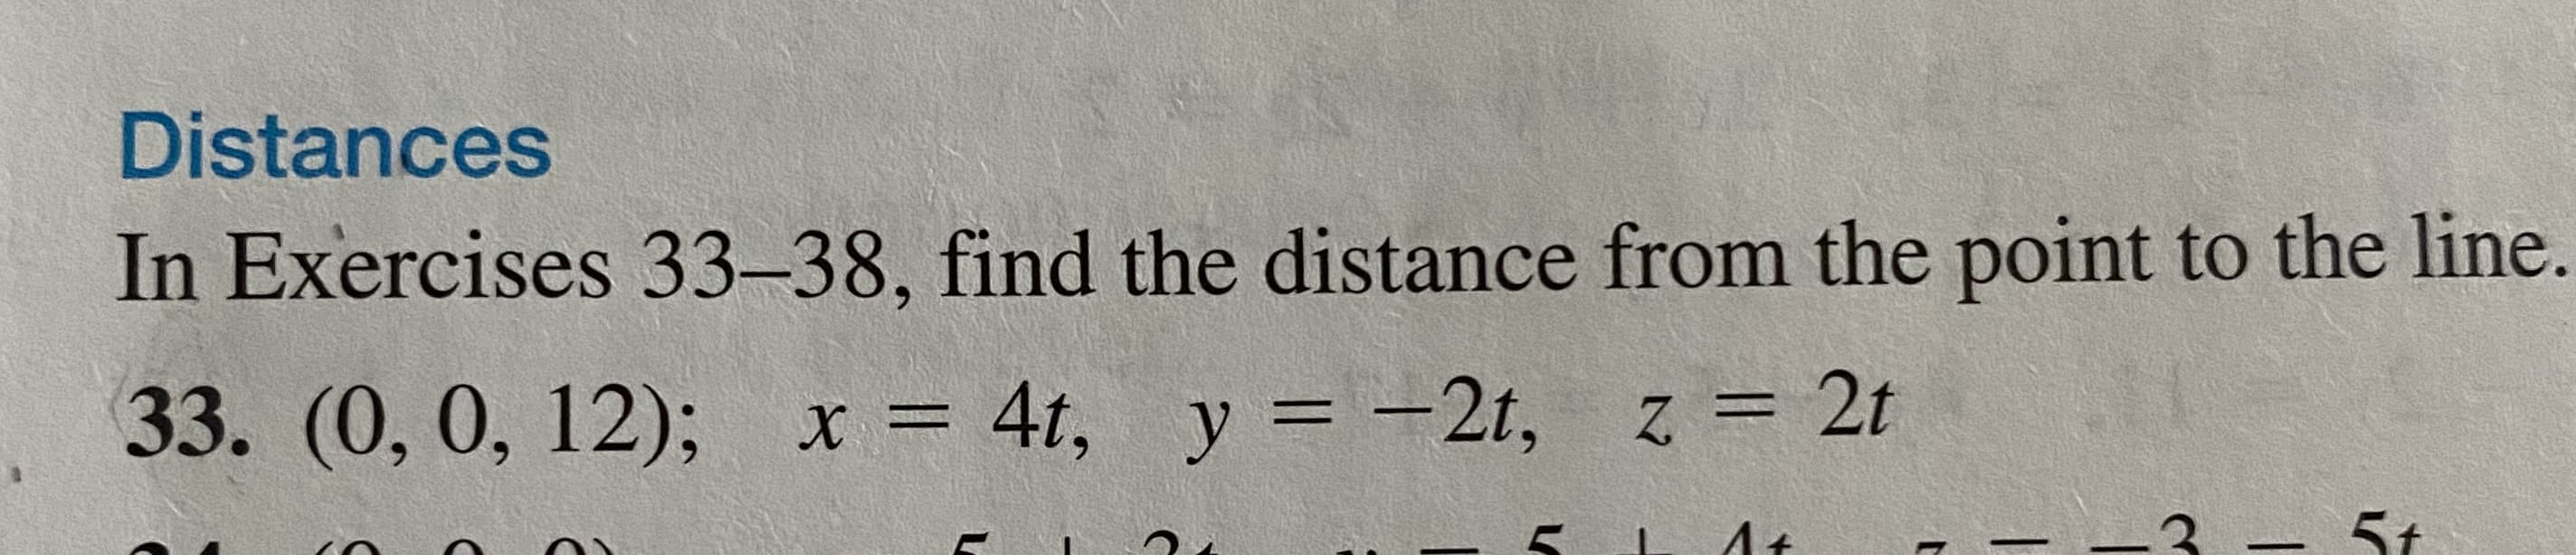 In Exercises 33-38, find the distance from the point to the line.
33. (0, 0, 12); x = 4t, y = -2t, z = 2t
